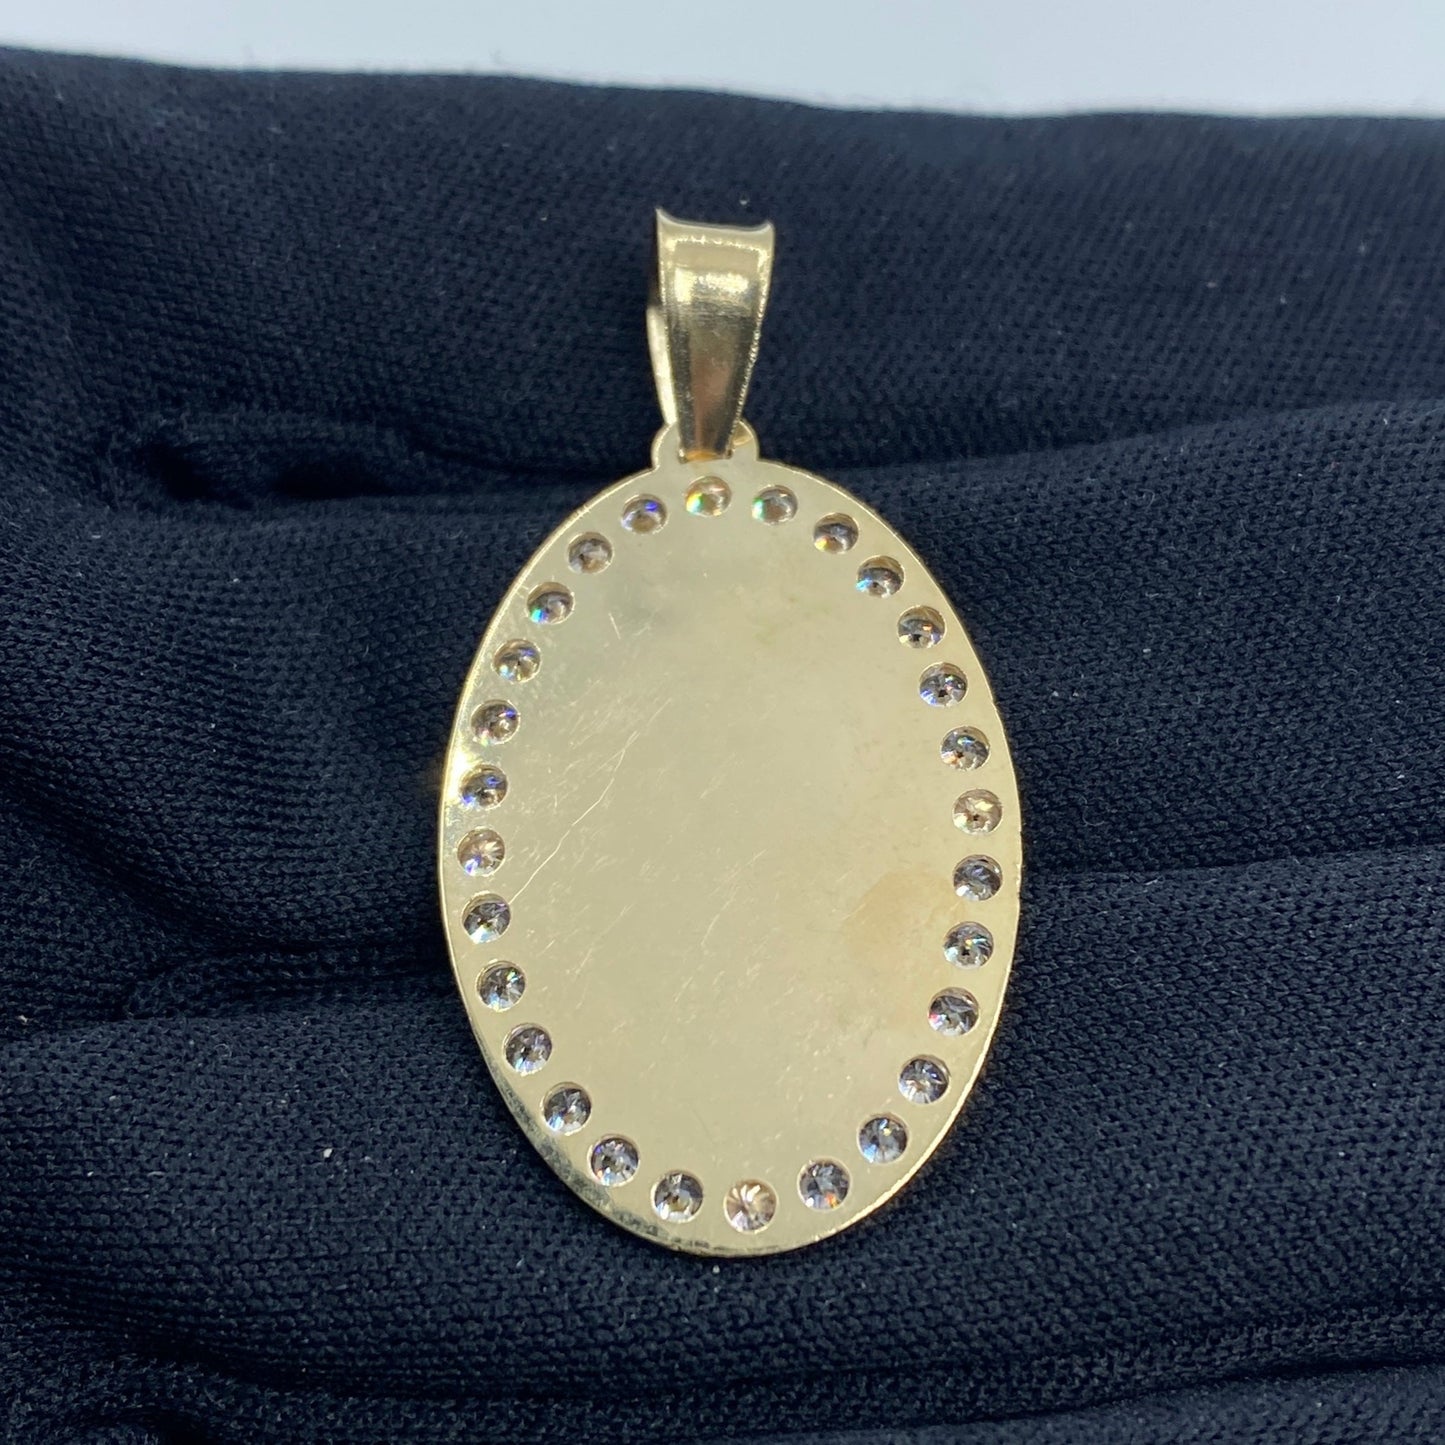 10K Oval Picture Photo Pendant